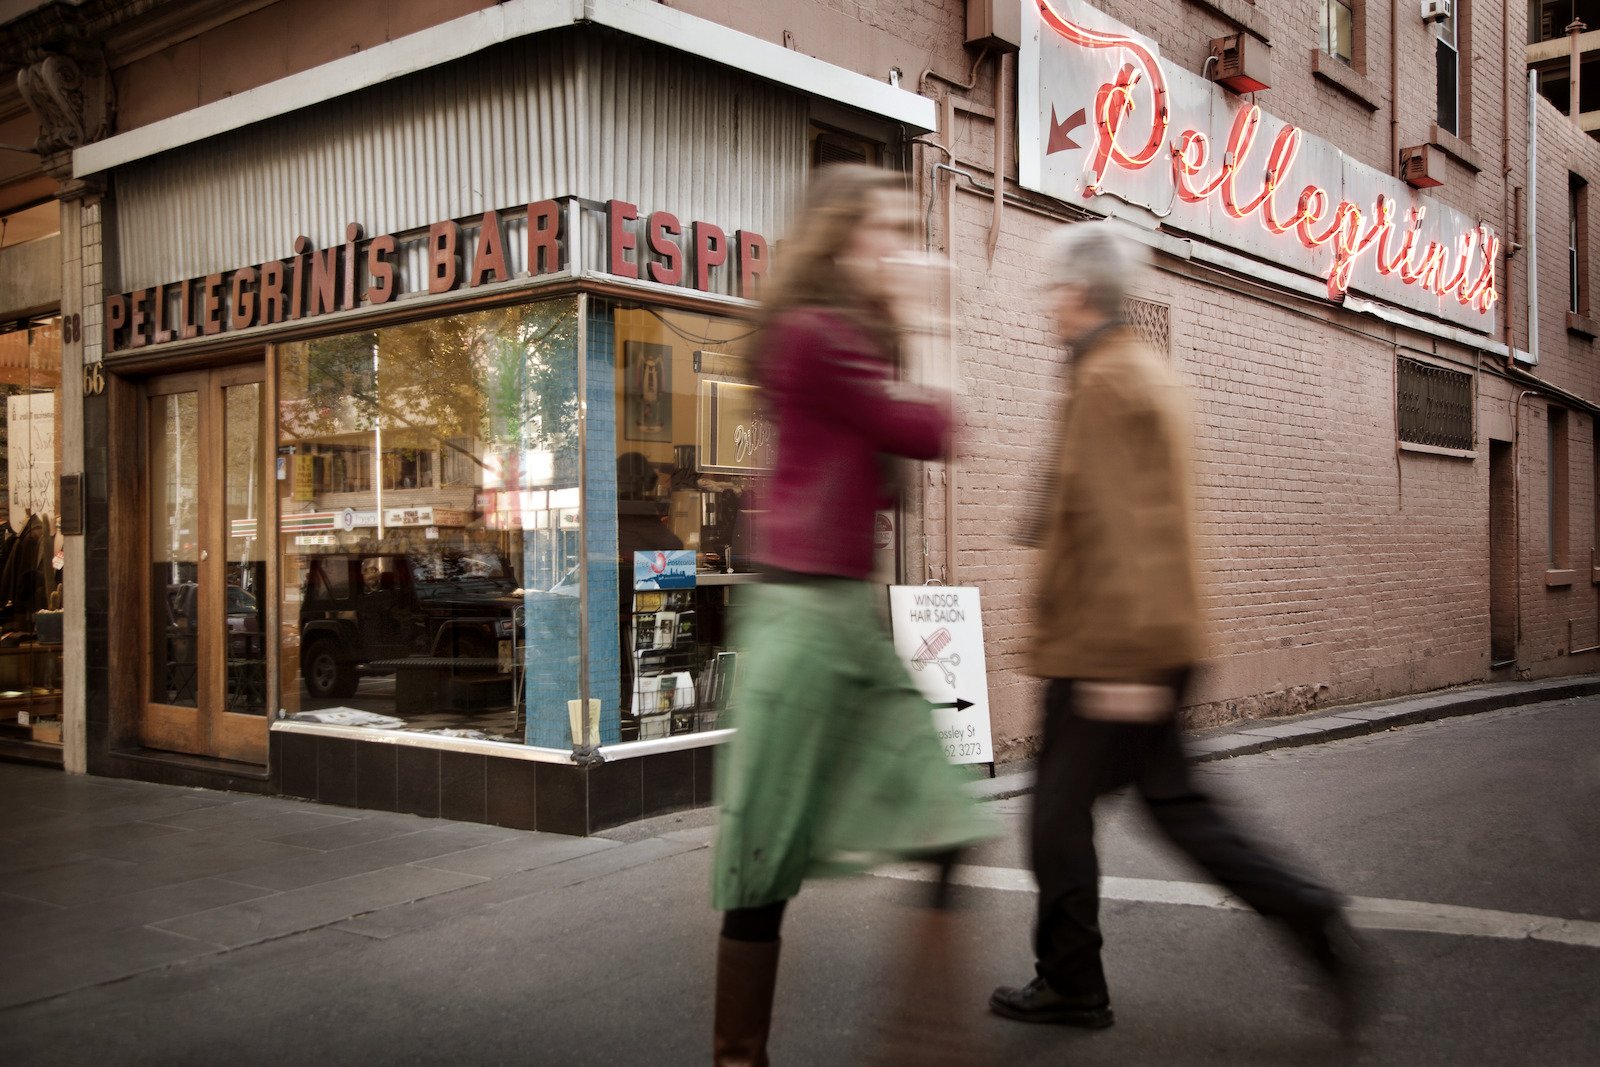 Exterior of Pellegrinis bar with visibler neon signage, pedestrians walk past in foreground